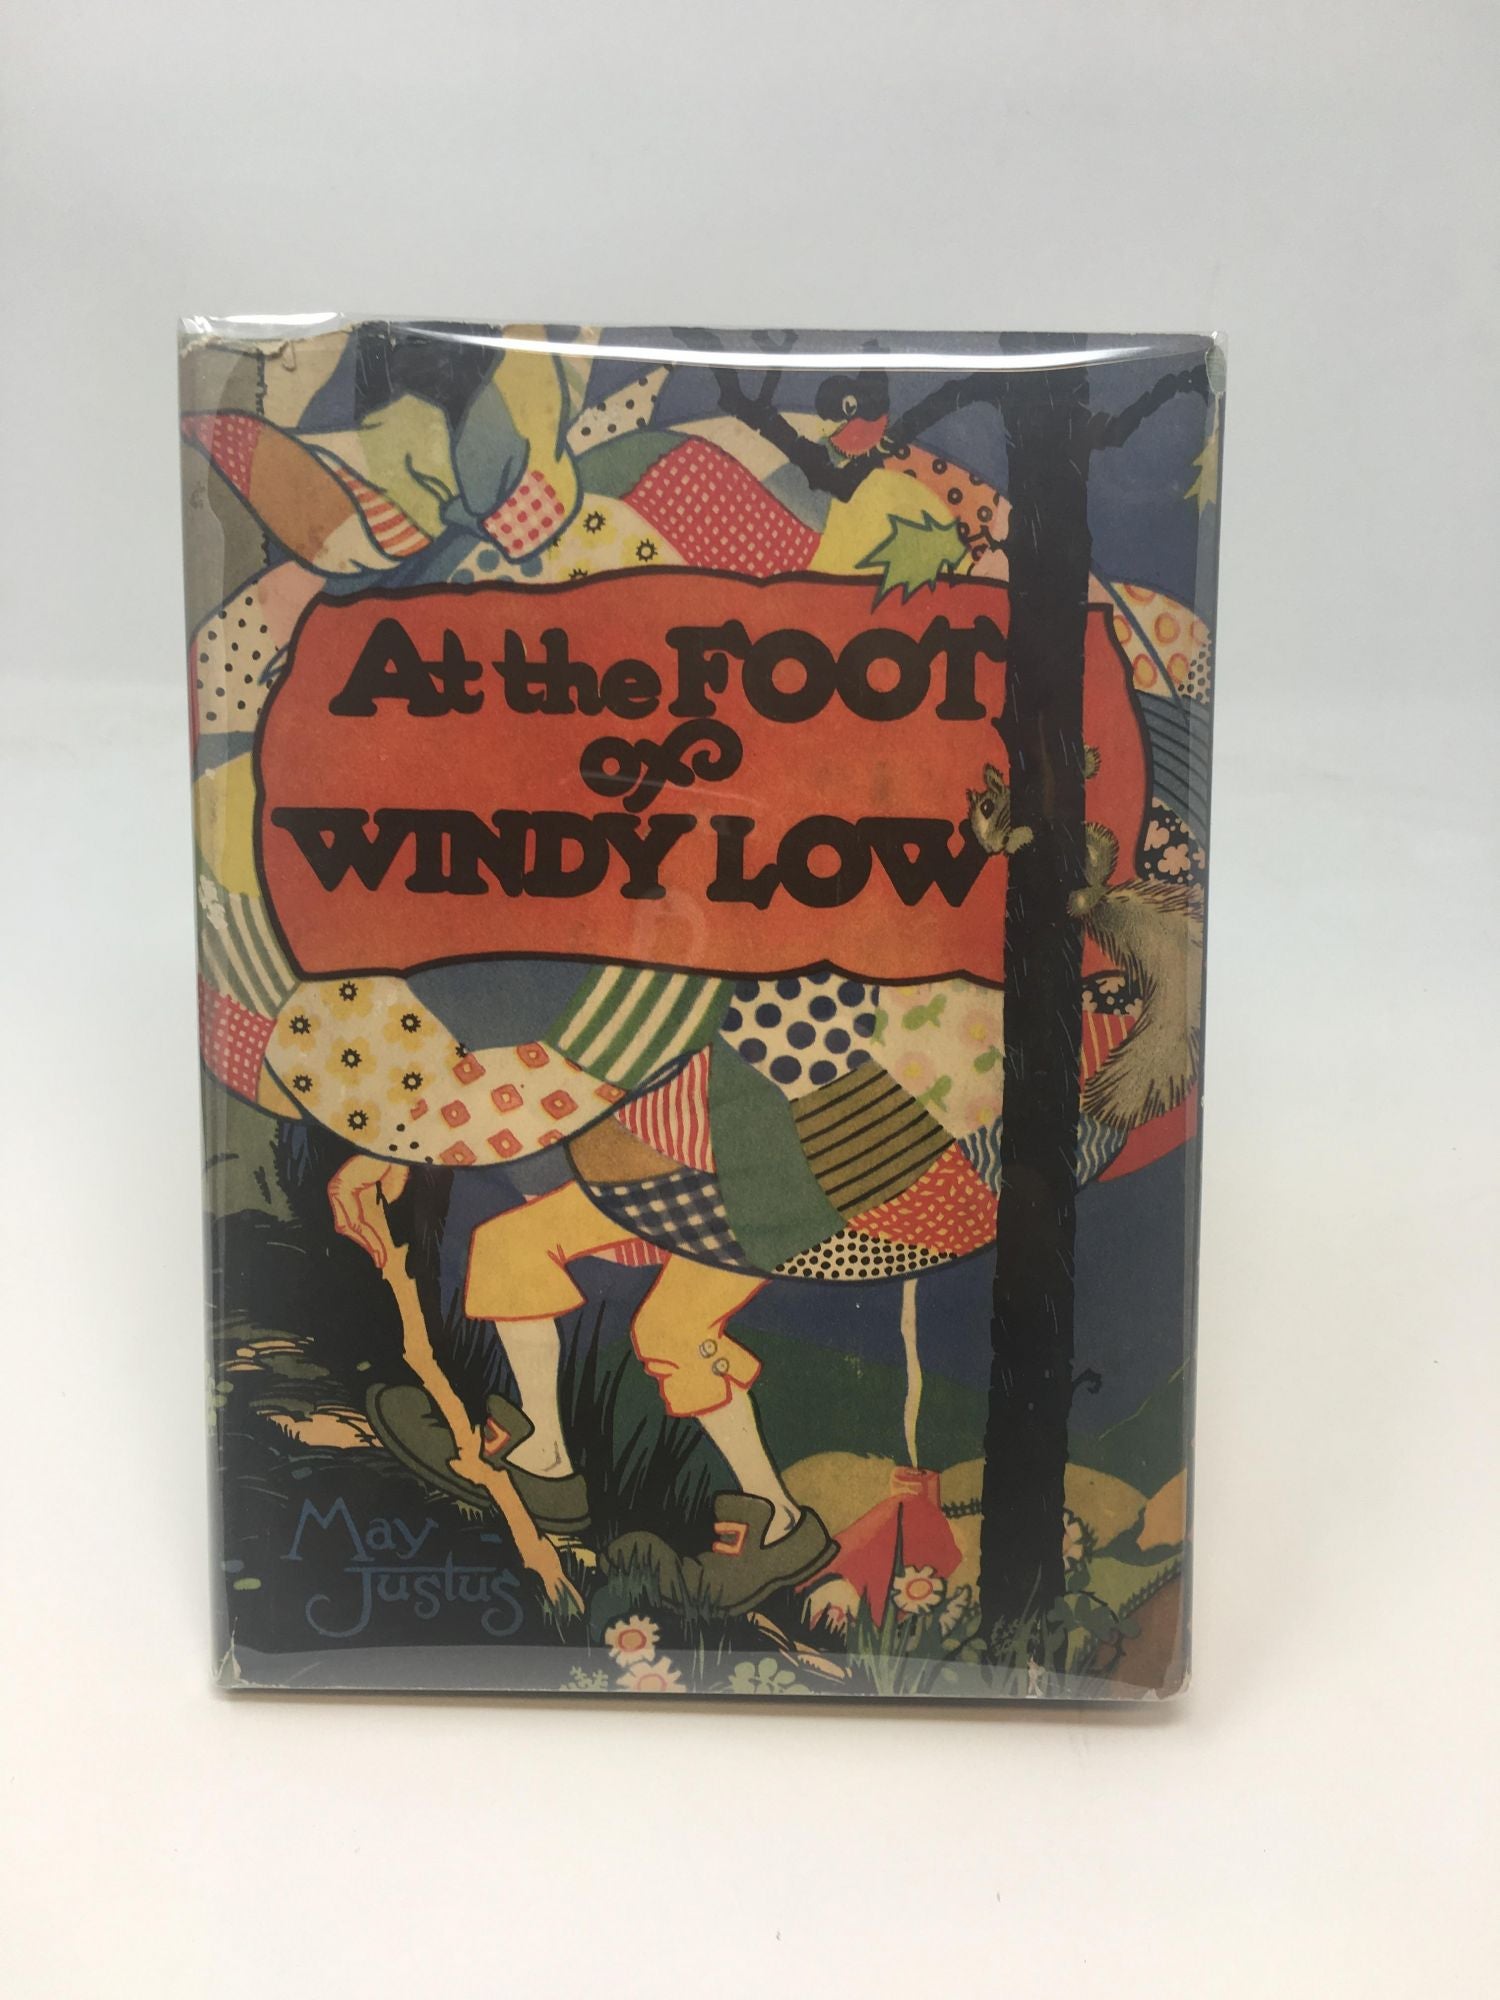 Justus, May and Carrie Dudley (Illustrator) - At the Foot of Windy Low